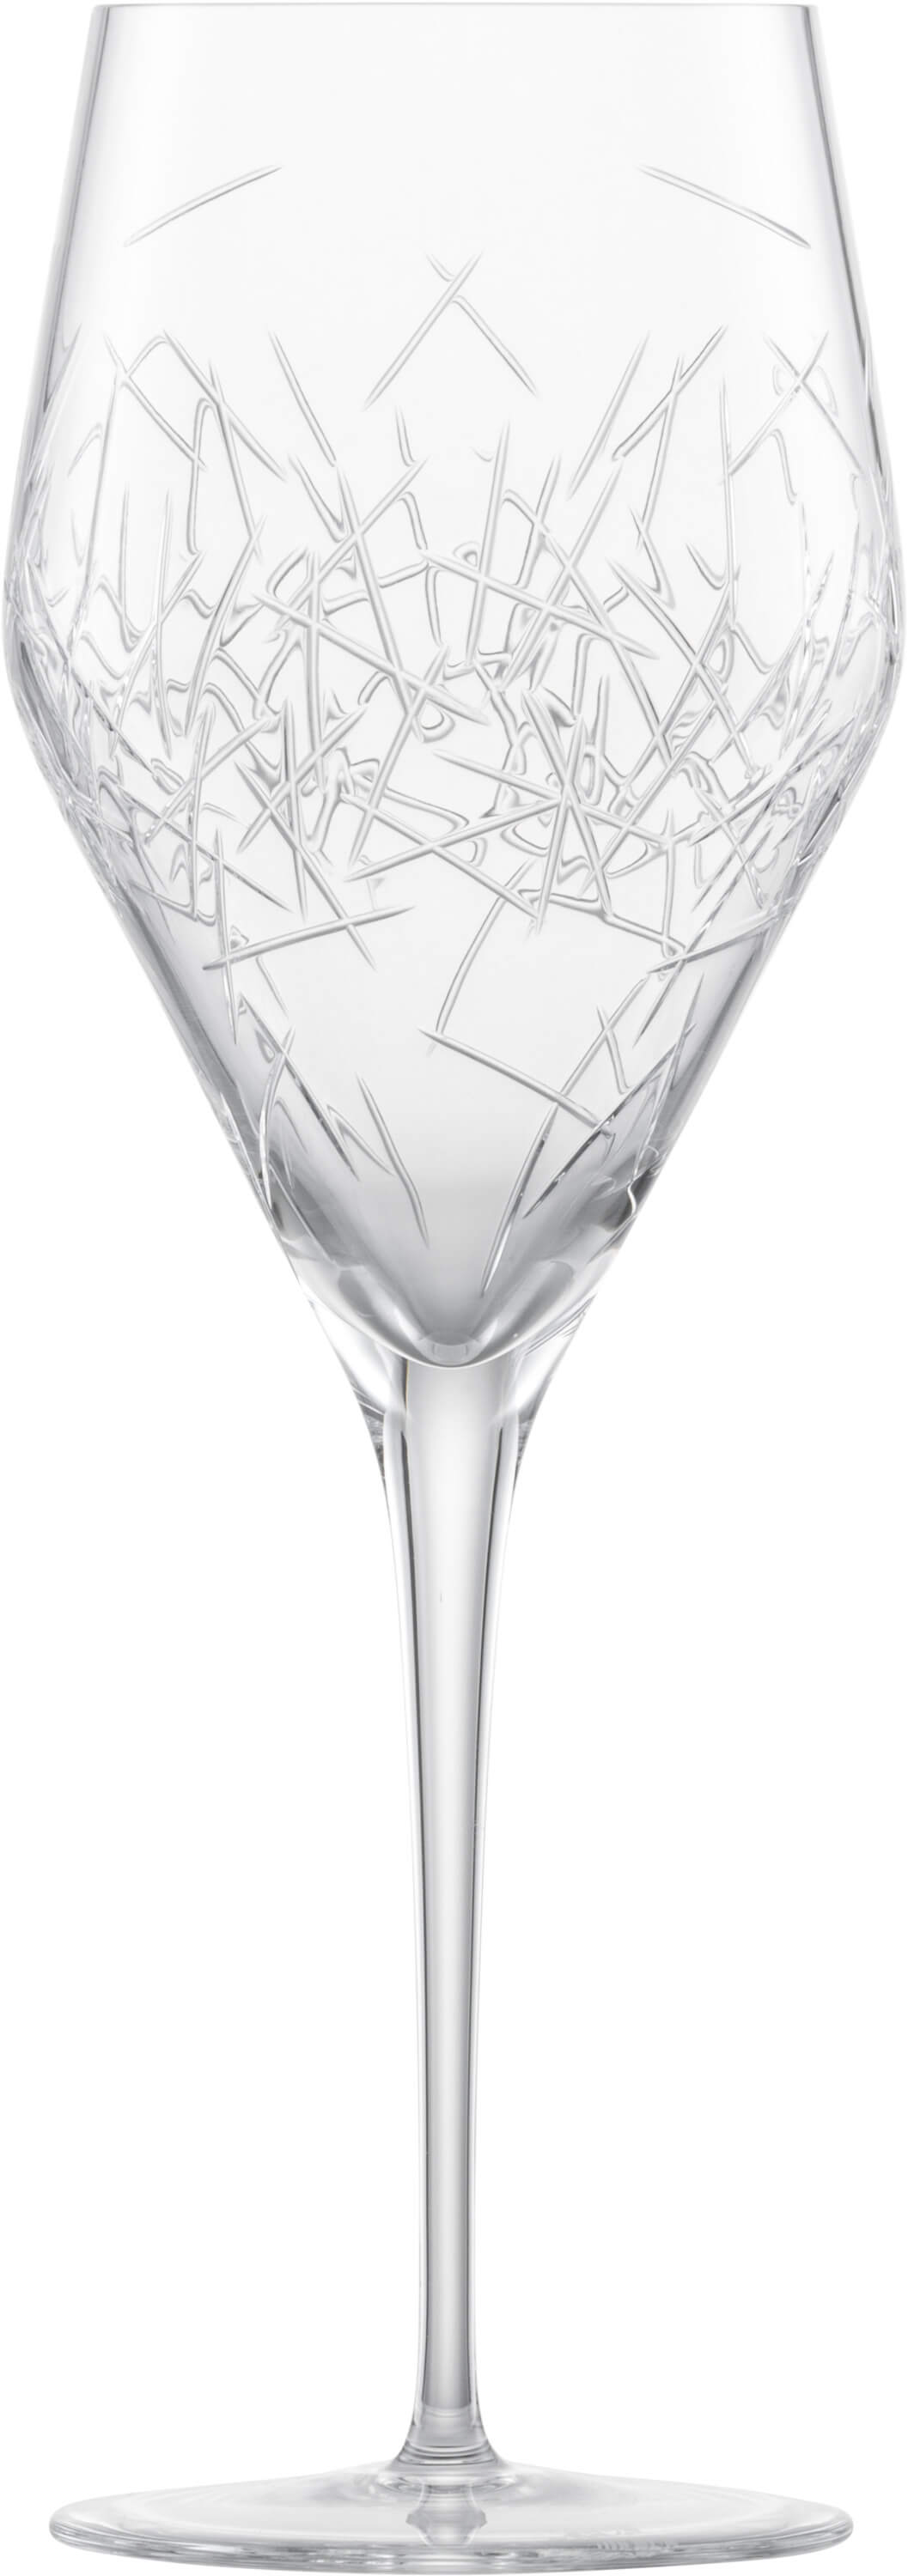 All-round wine glass Hommage Glace, Zwiesel Glas - 357ml (1 pc.)